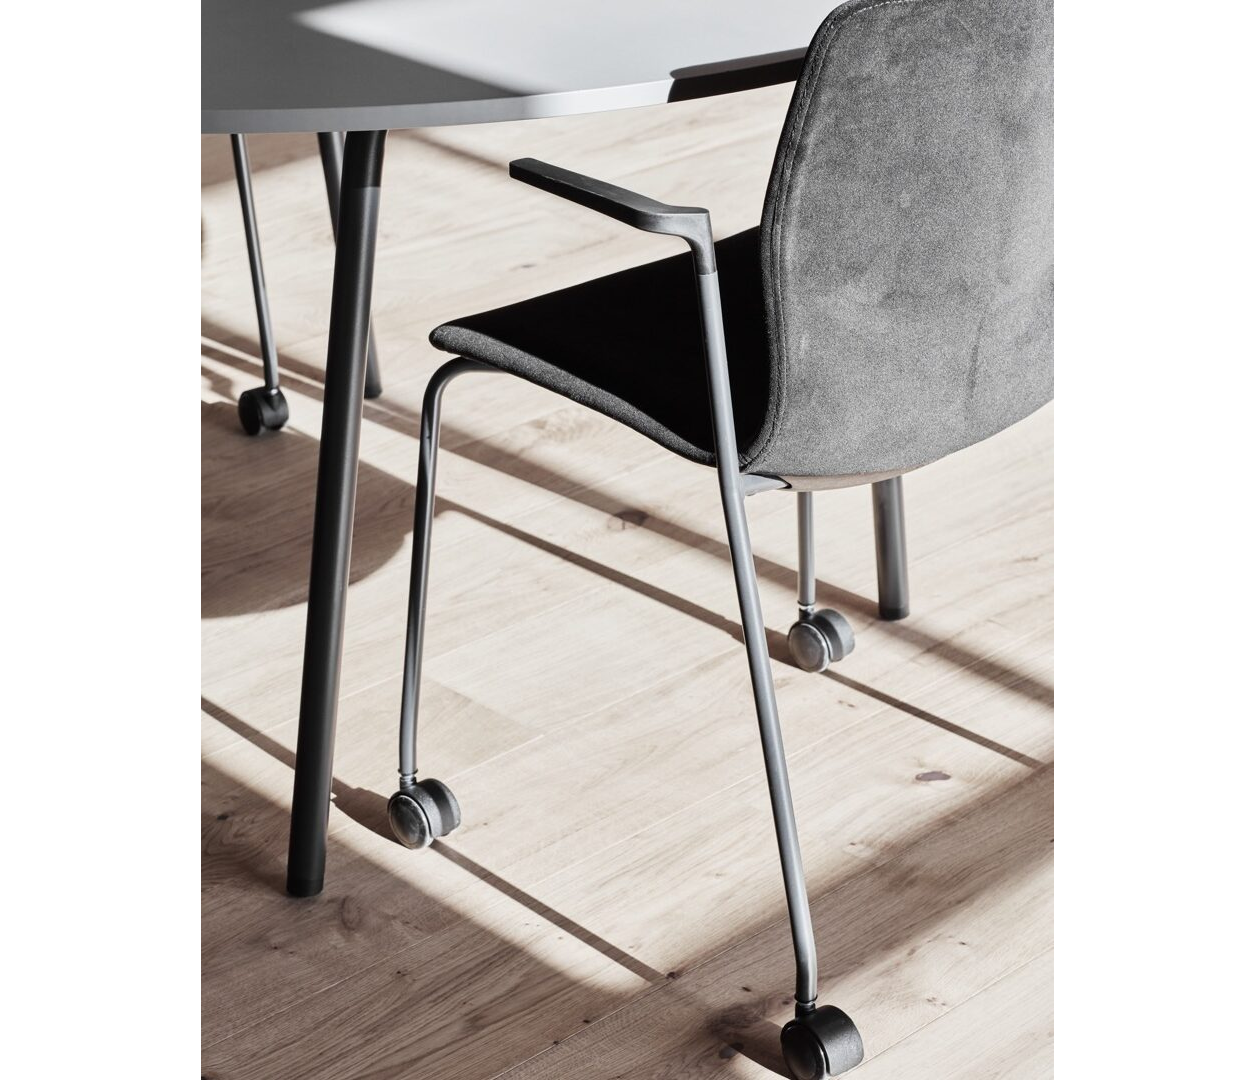 OCEE&FOUR – Chairs – FourSure 77 – Details Image 4 Large